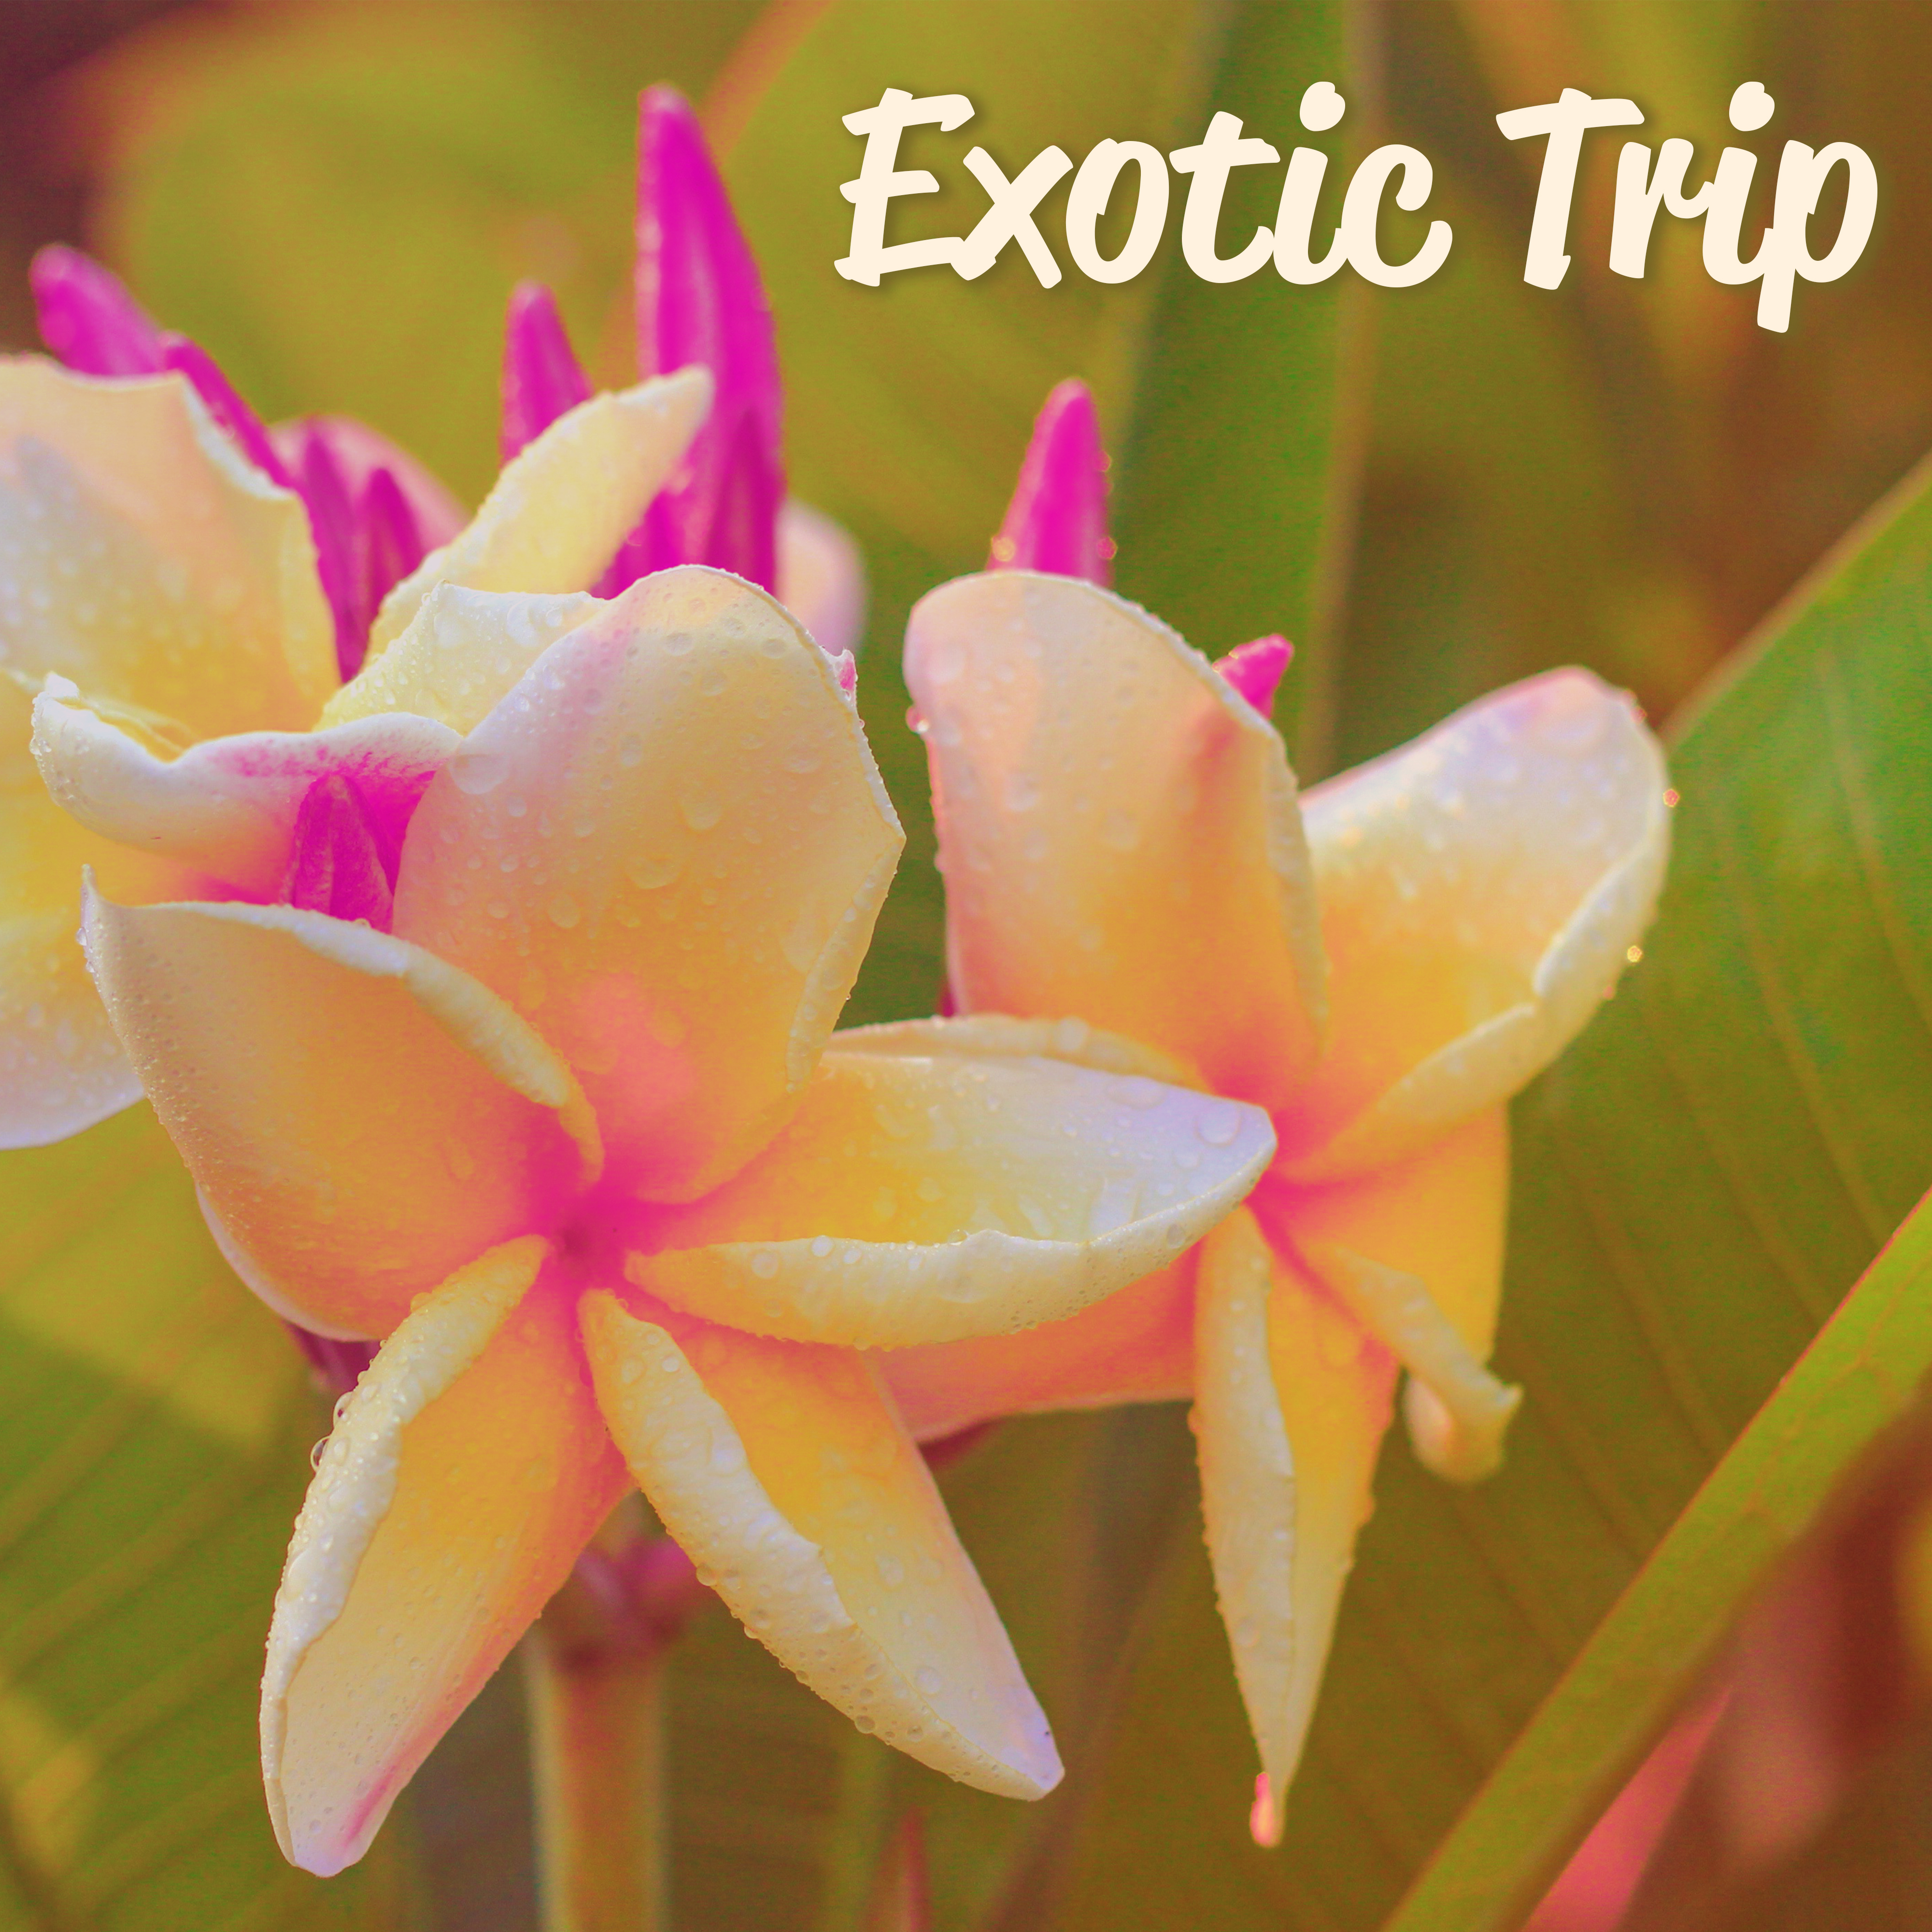 Exotic Trip – Holiday Chill Out Music, Tropical Rest, Cocktails & Drinks Under Palms, Beach Chill, Pure Relaxation